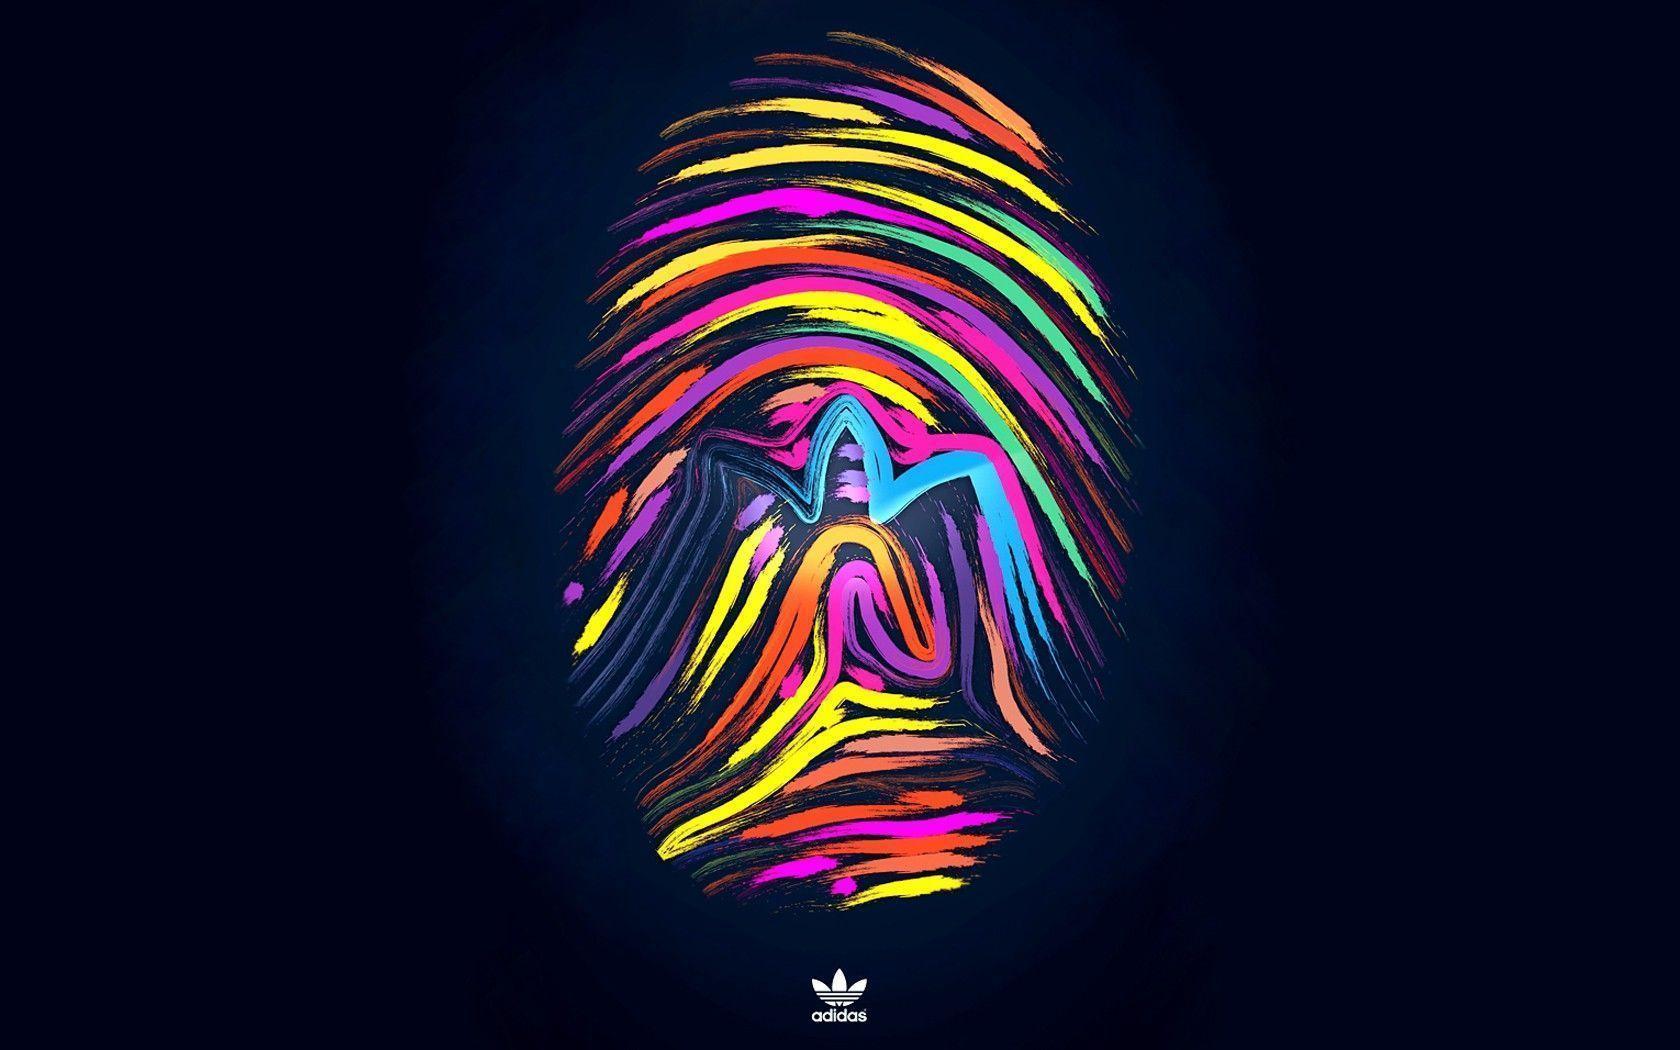 Wallpaper For > Adidas Wallpaper For iPhone 5